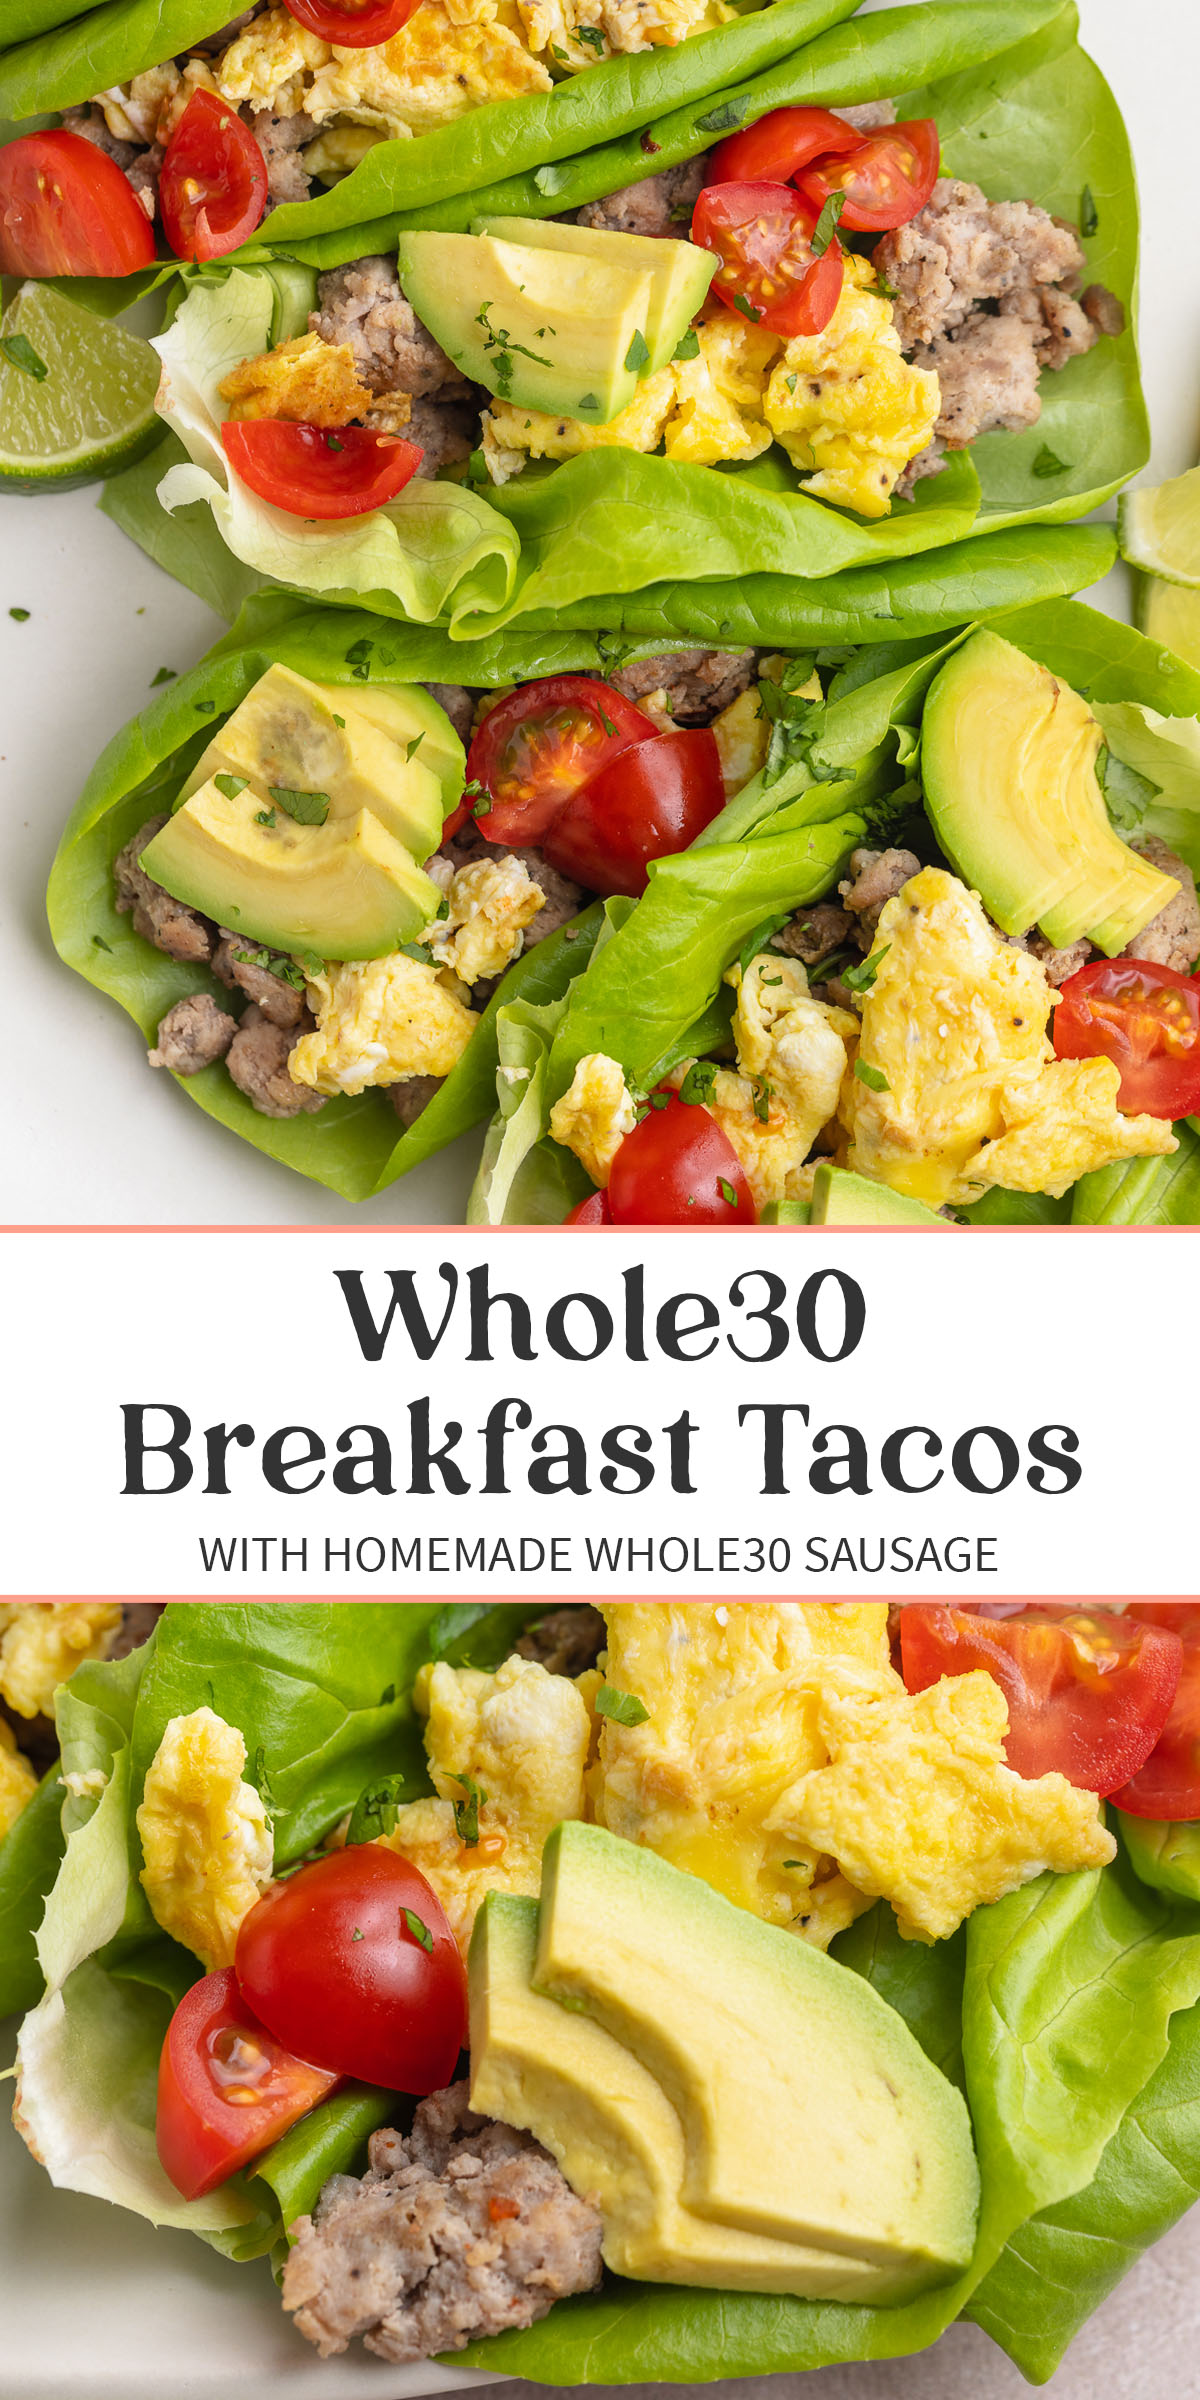 Pin graphic for Whole30 breakfast tacos.